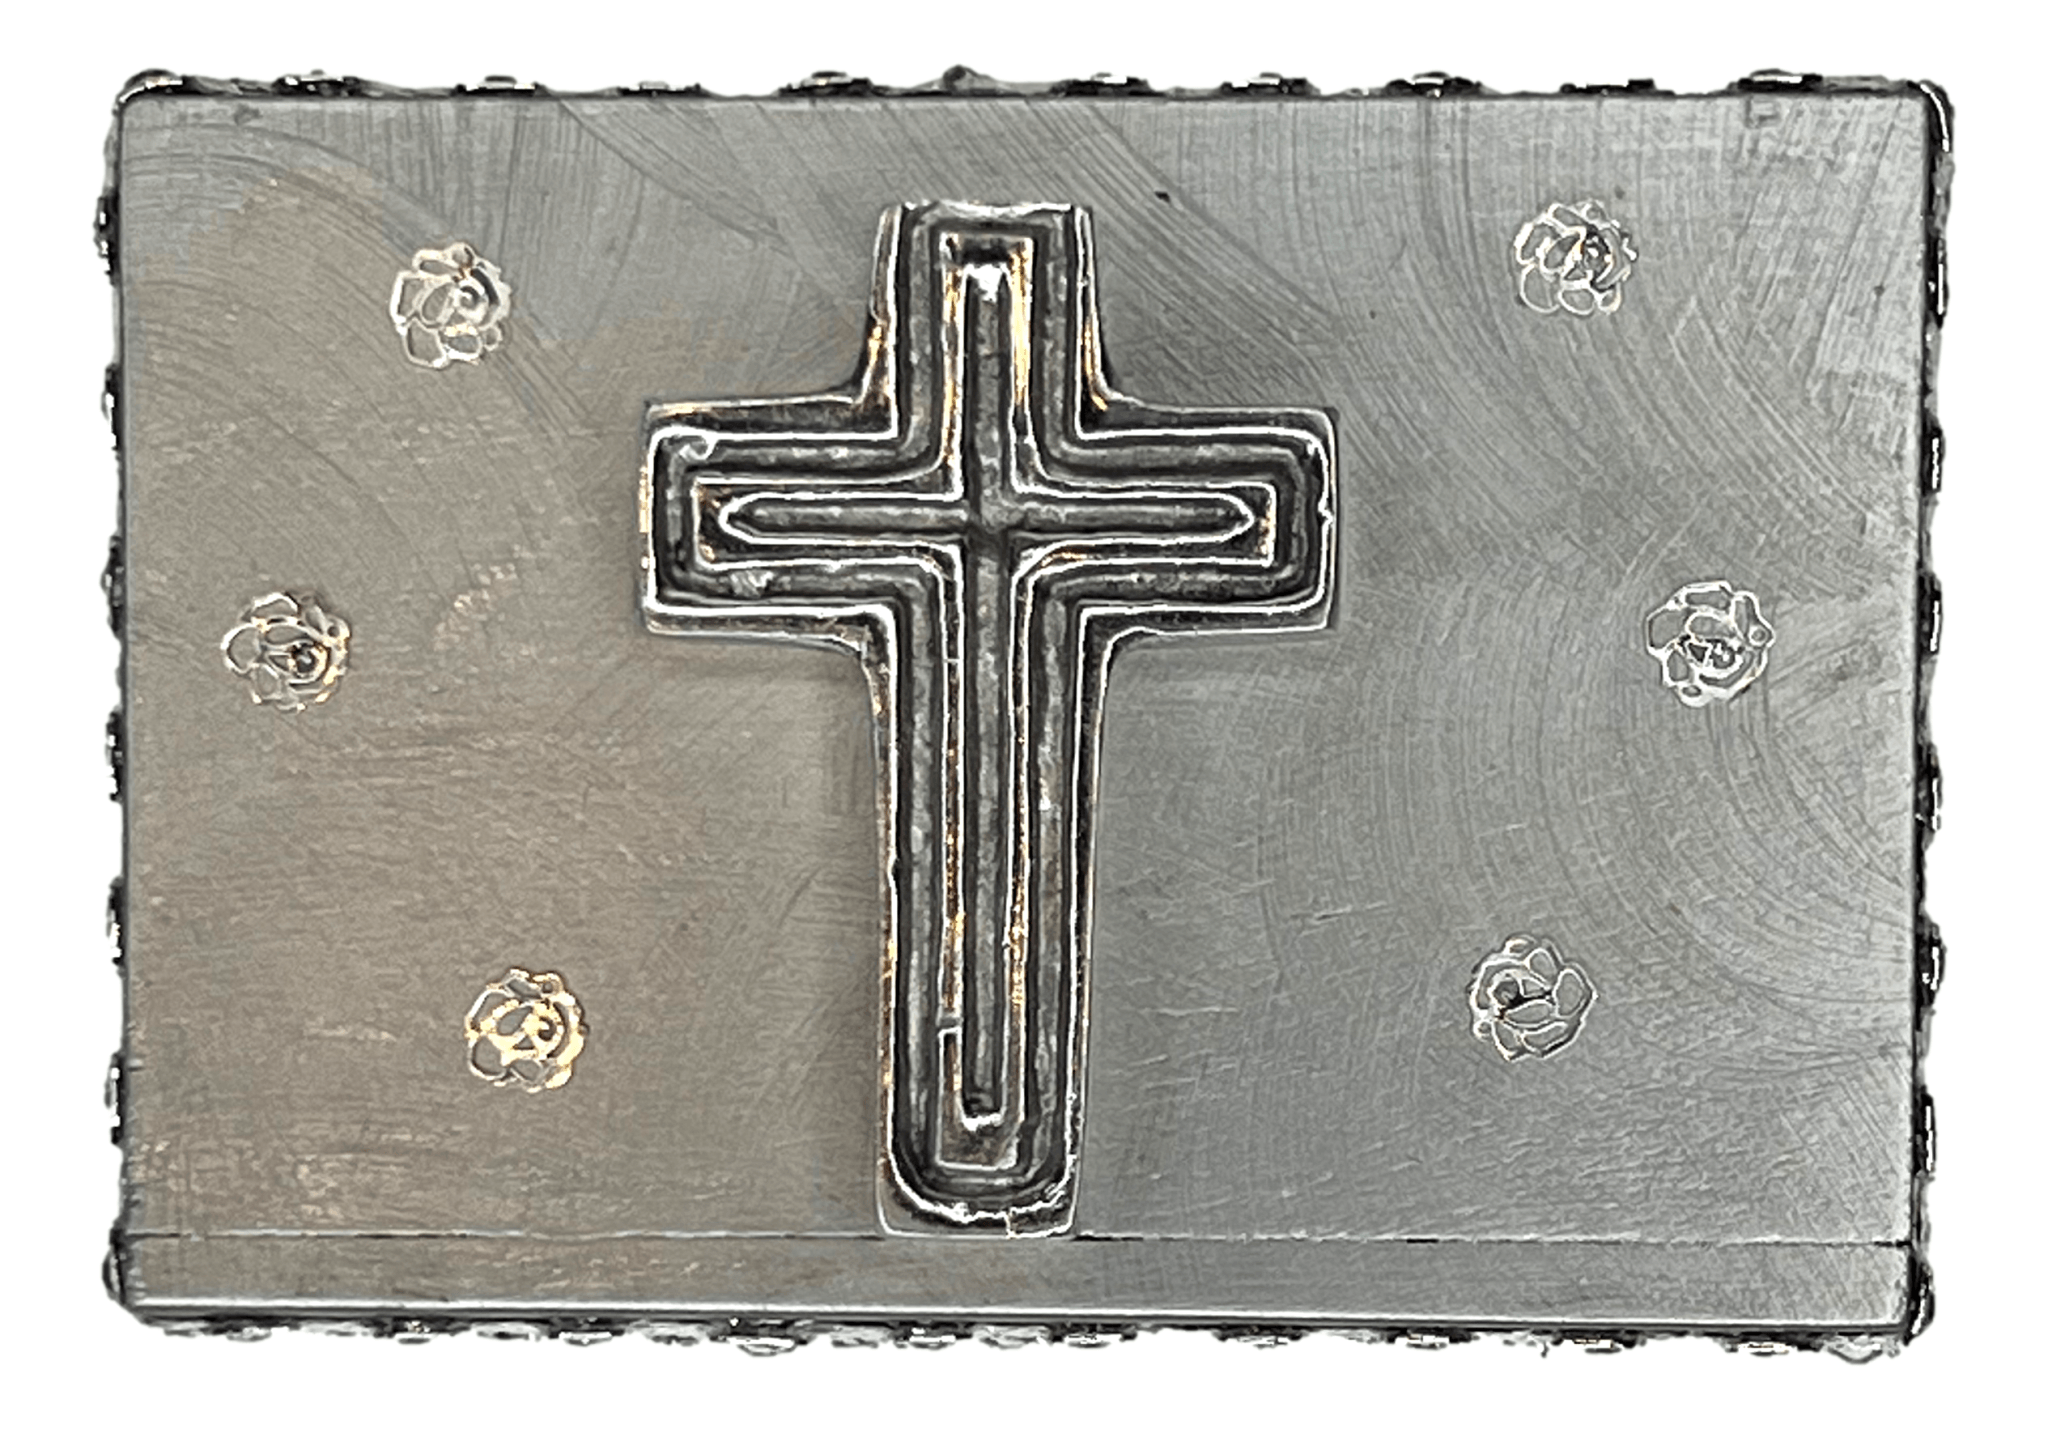 Plaque Pewter Cross Flower Metal Detailing Silver Laced Edge L: 3.5 inches X W: 5 inches Created By Local Artist Norma - Ysleta Mission Gift Shop- VOTED El Paso's Best Gift Shop